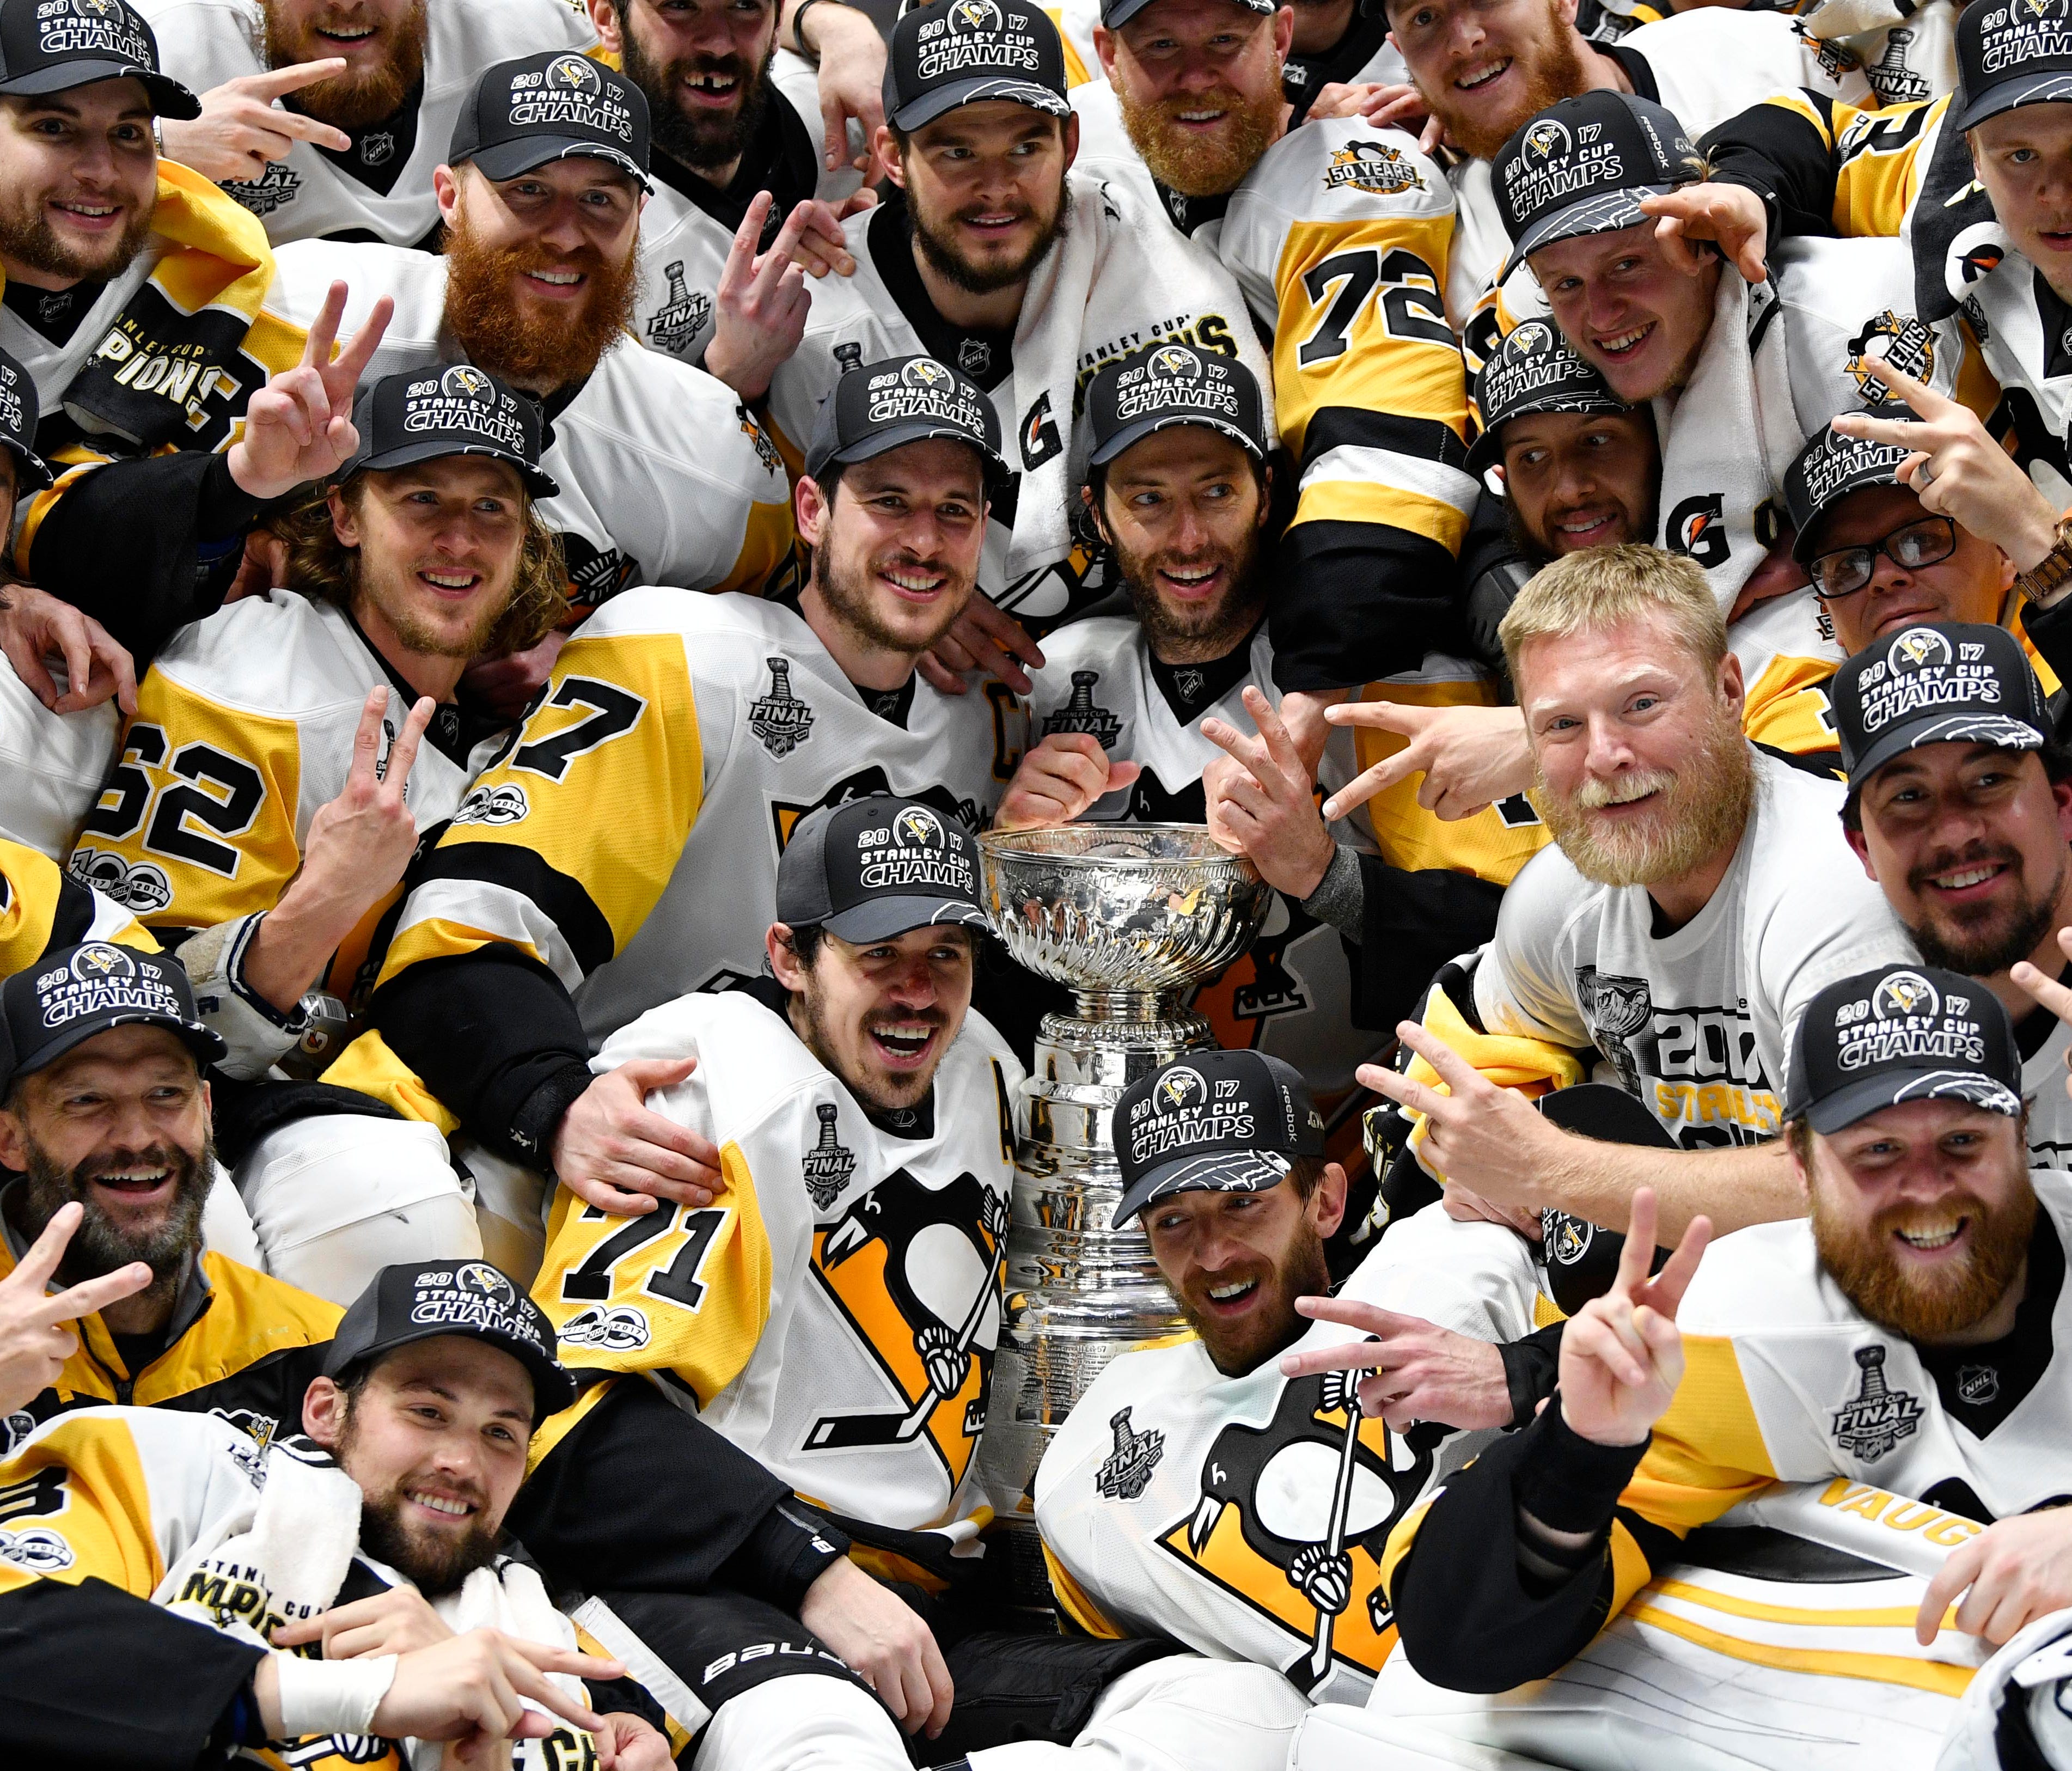 The Pittsburgh Penguins pose for a team photo with the Stanley Cup.